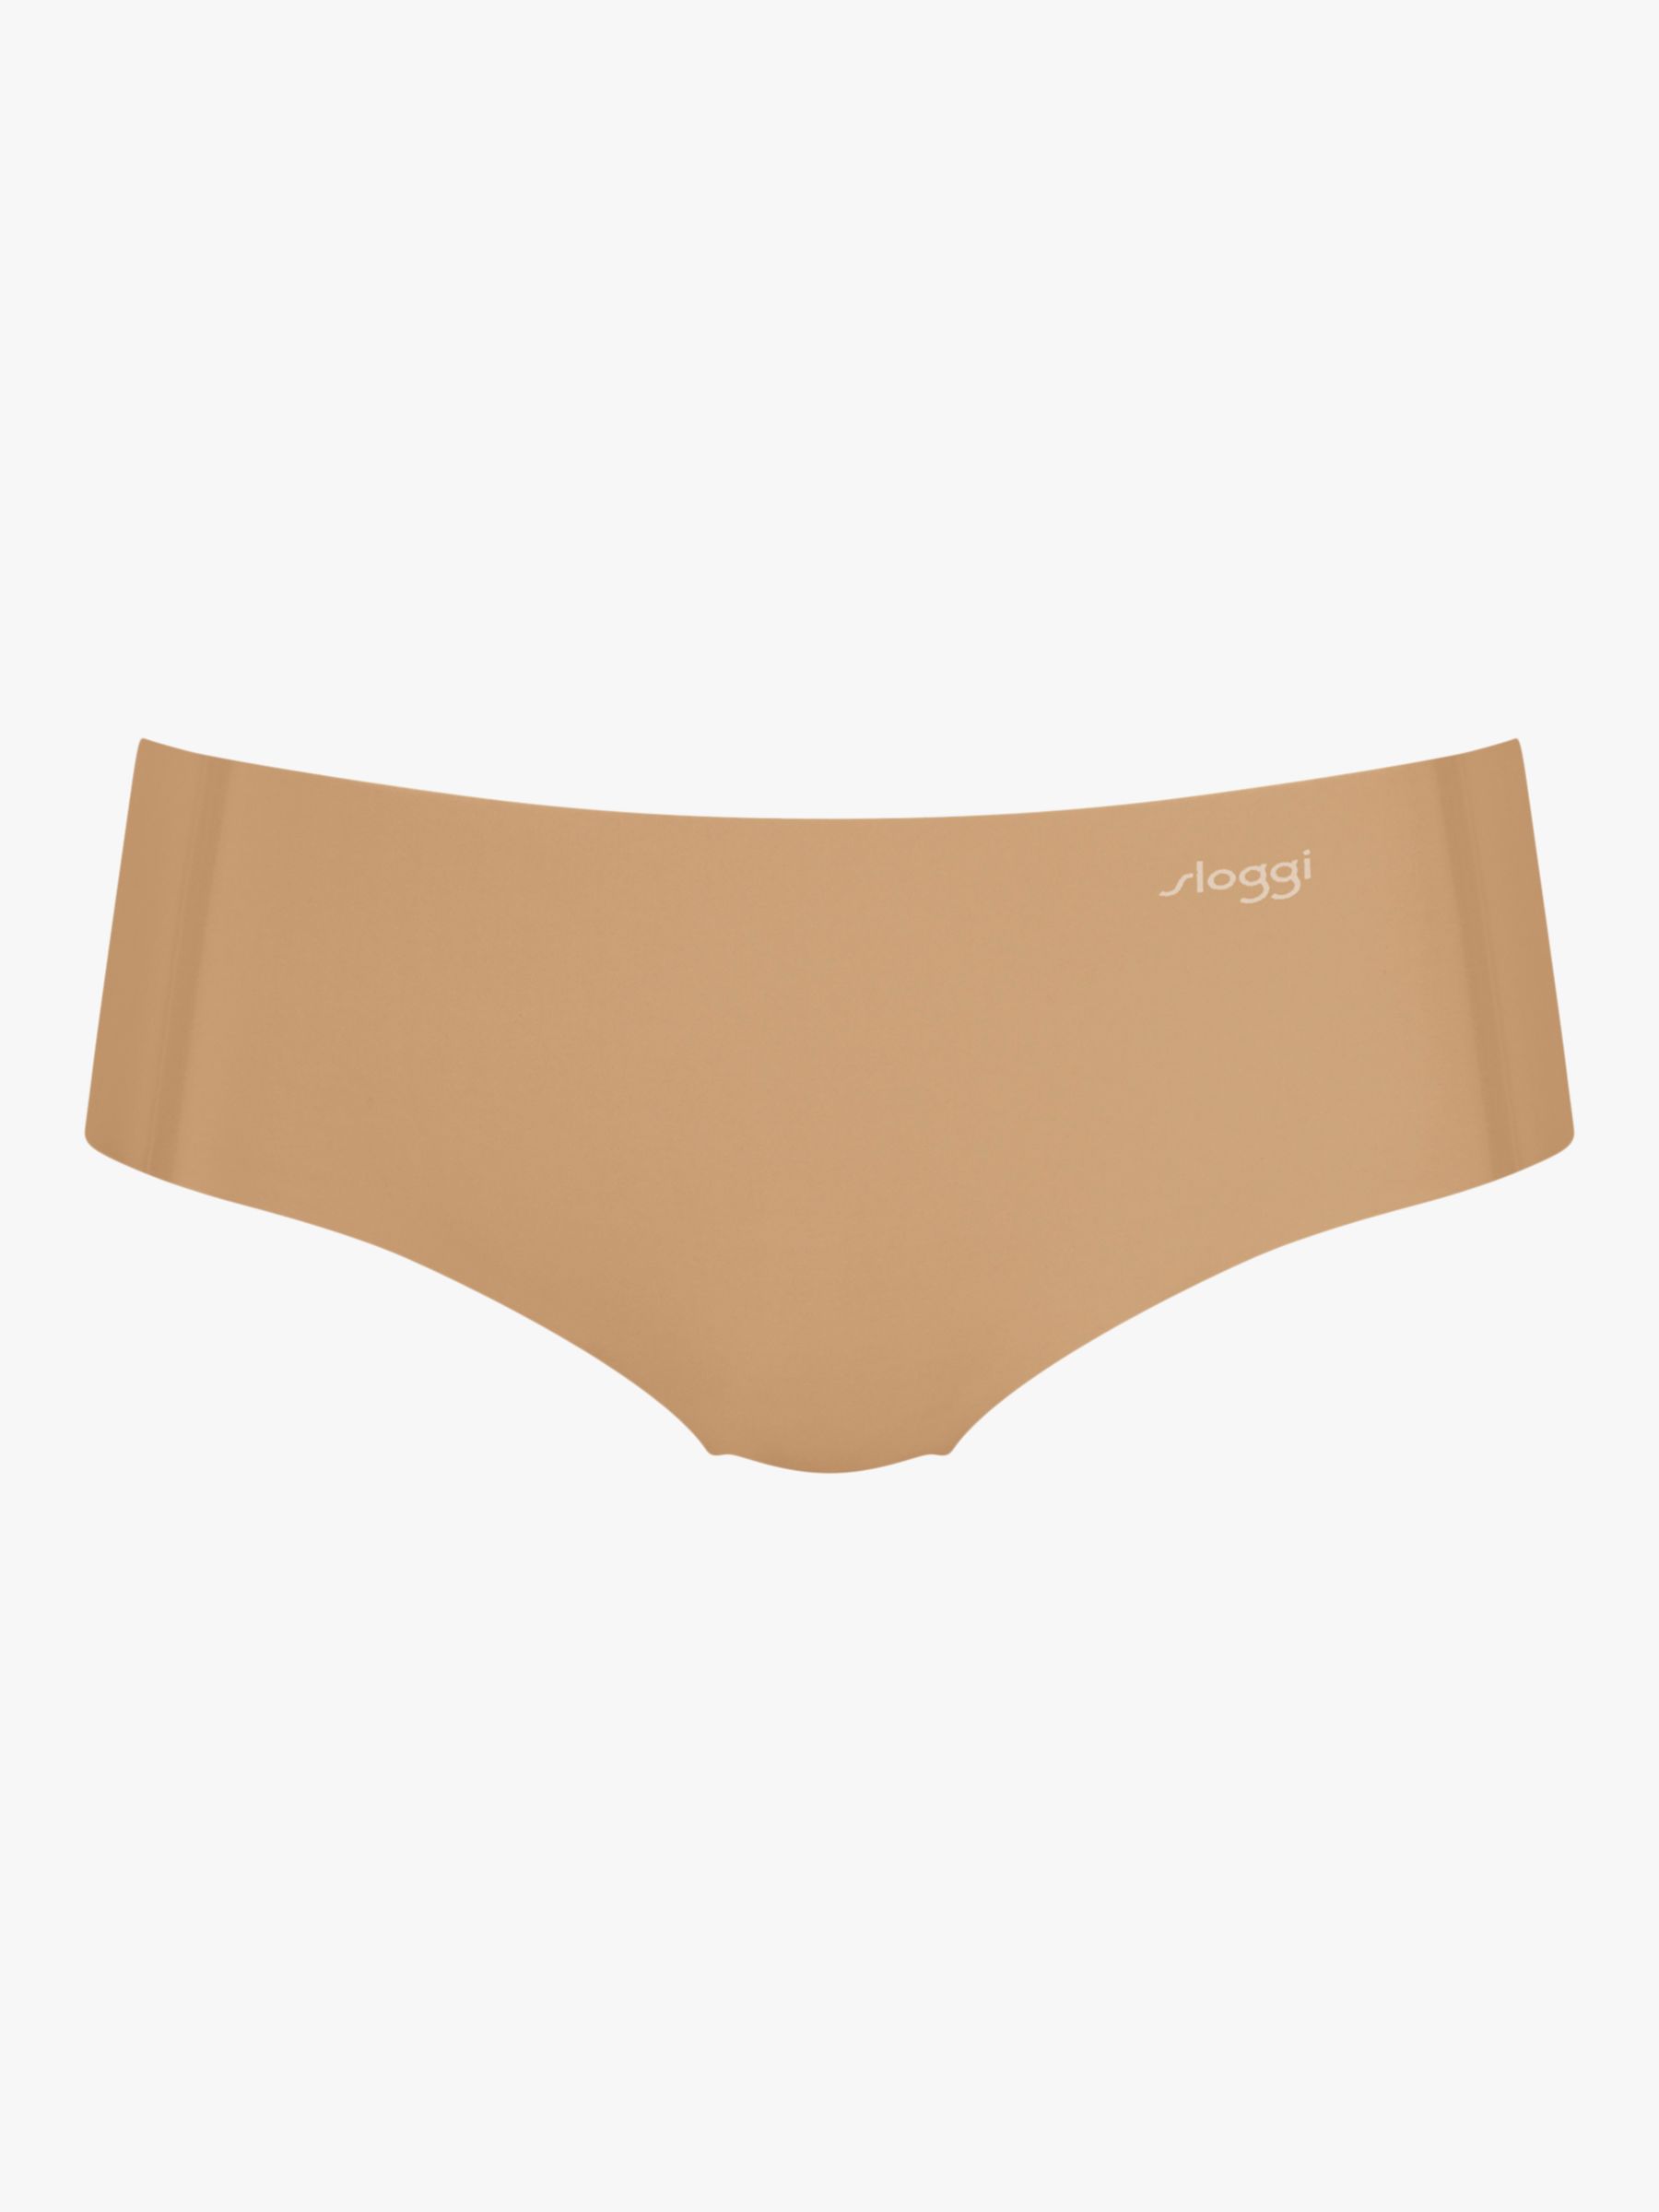 sloggi ZERO Feel Hipster Knickers, Pack of 2